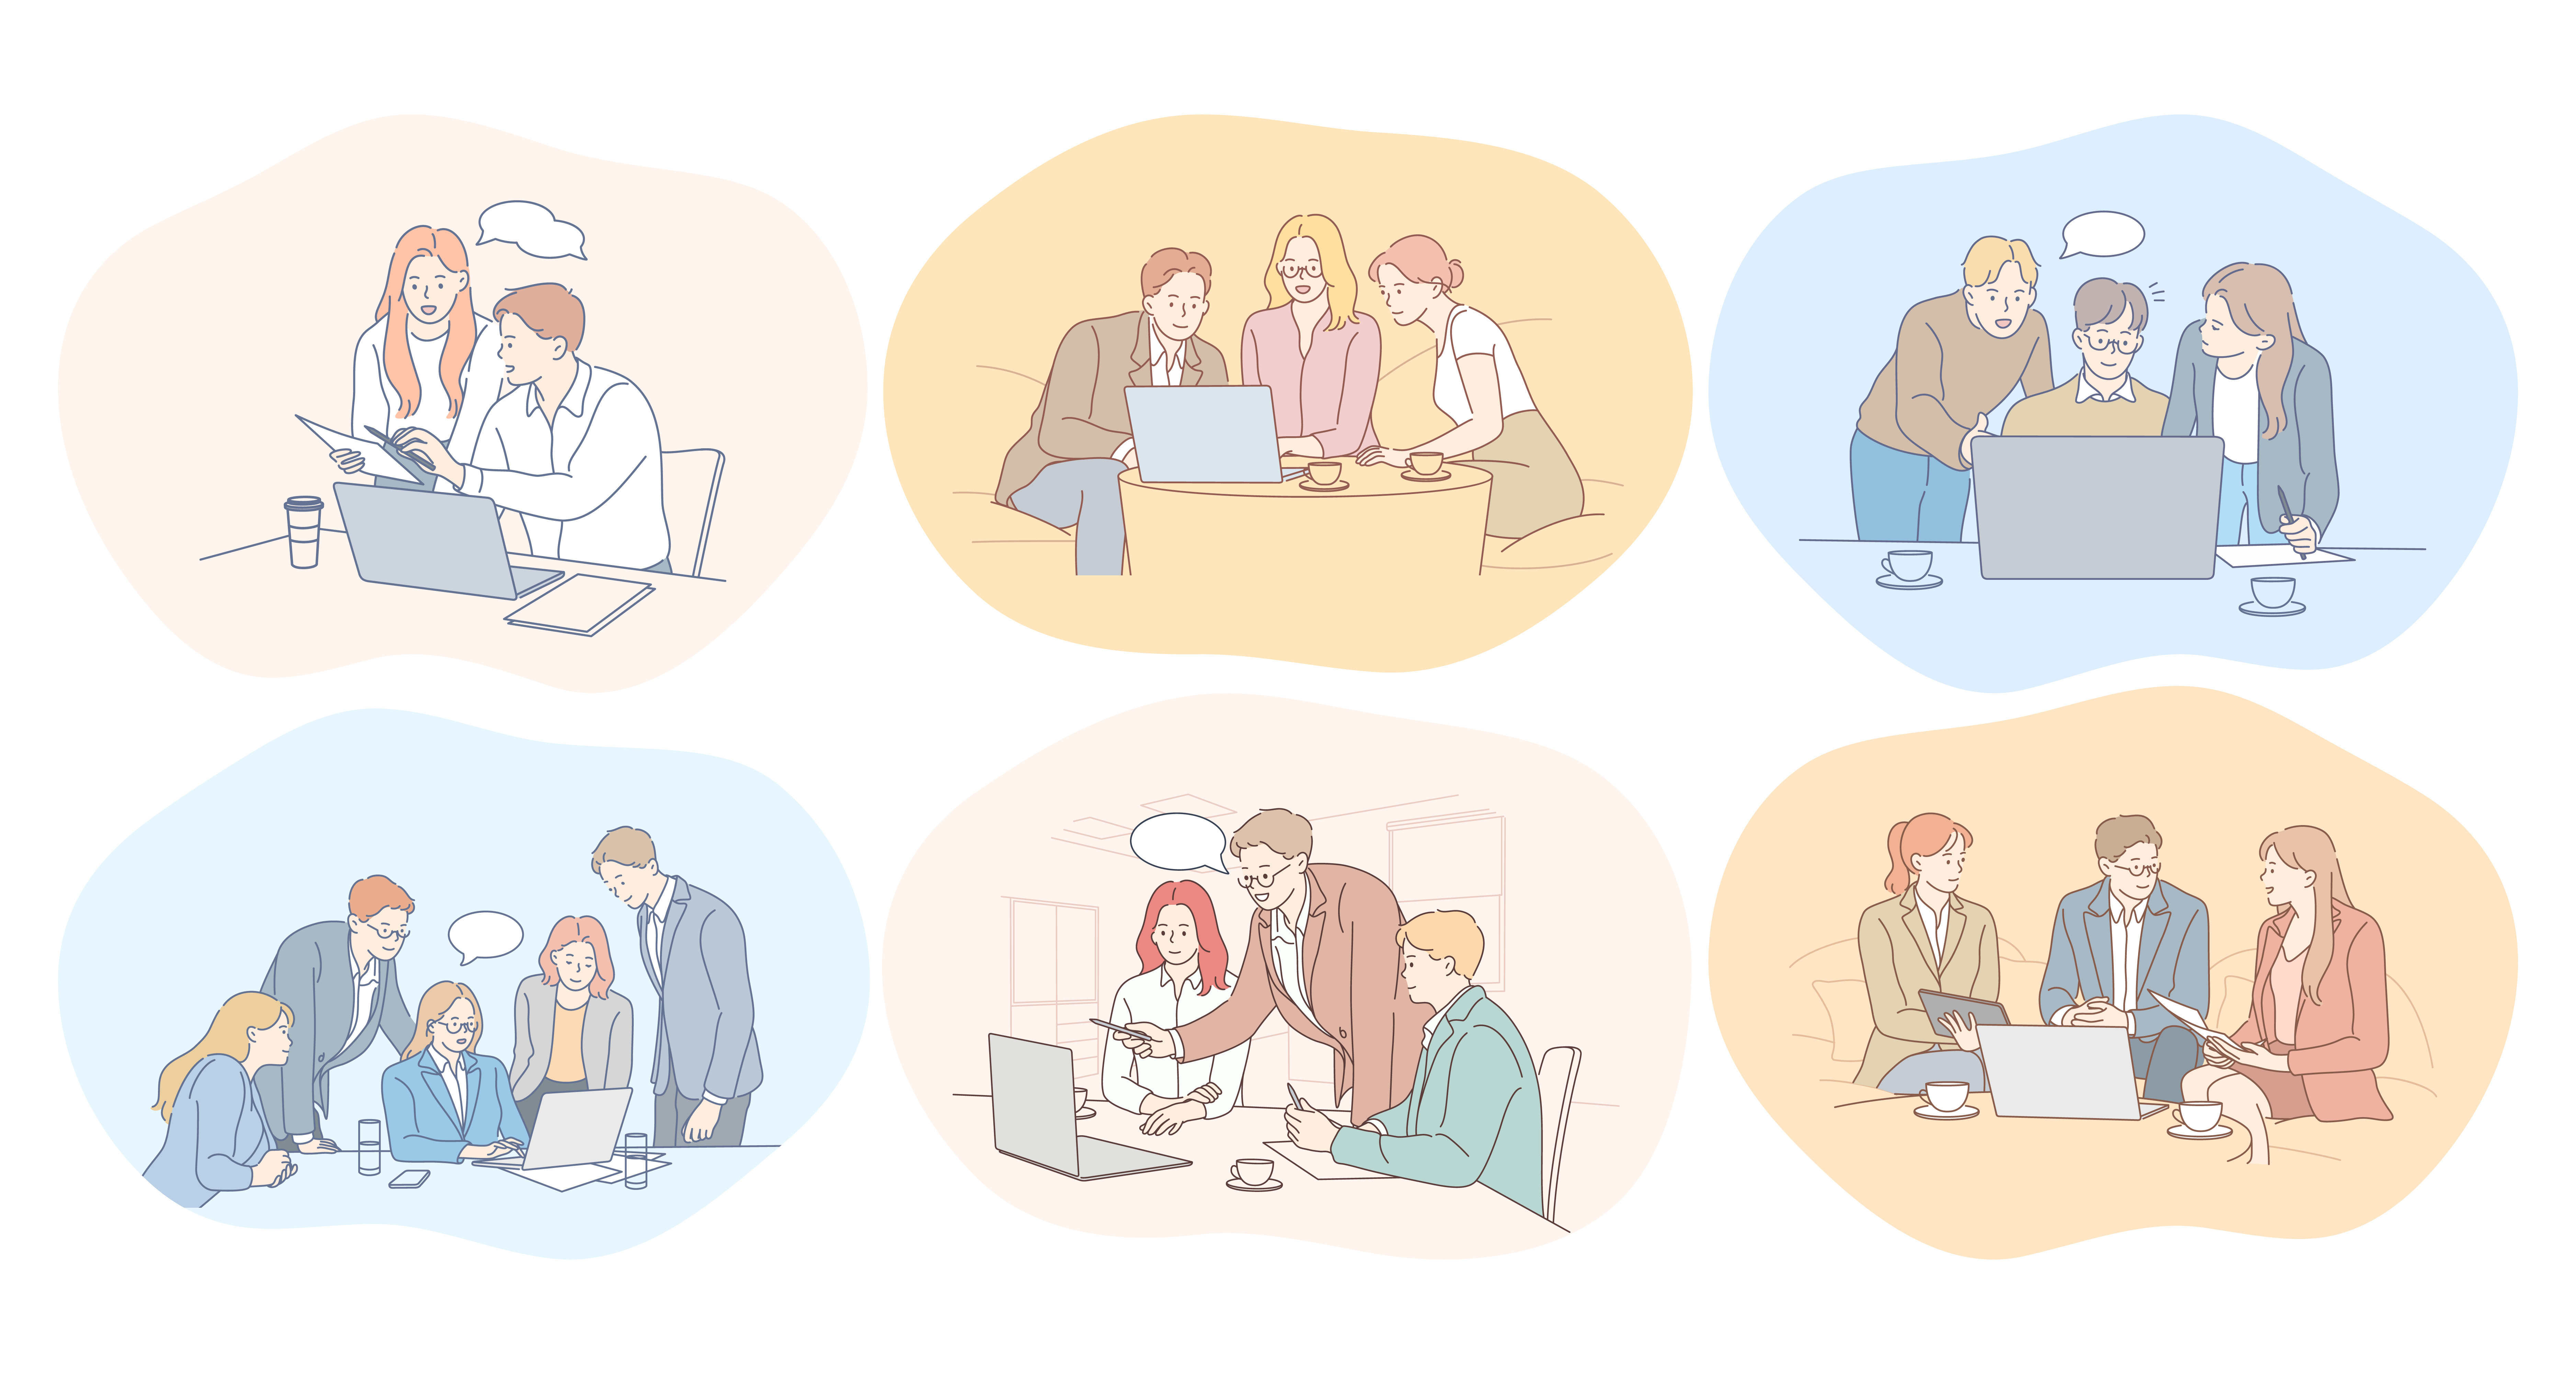 Negotiations, teamwork, brainstorming, collaboration, business, development, success concept. Young business people partners coworkers cartoon characters discussing projects in office together. Negotiations, teamwork, brainstorming, collaboration, business, development, success concept